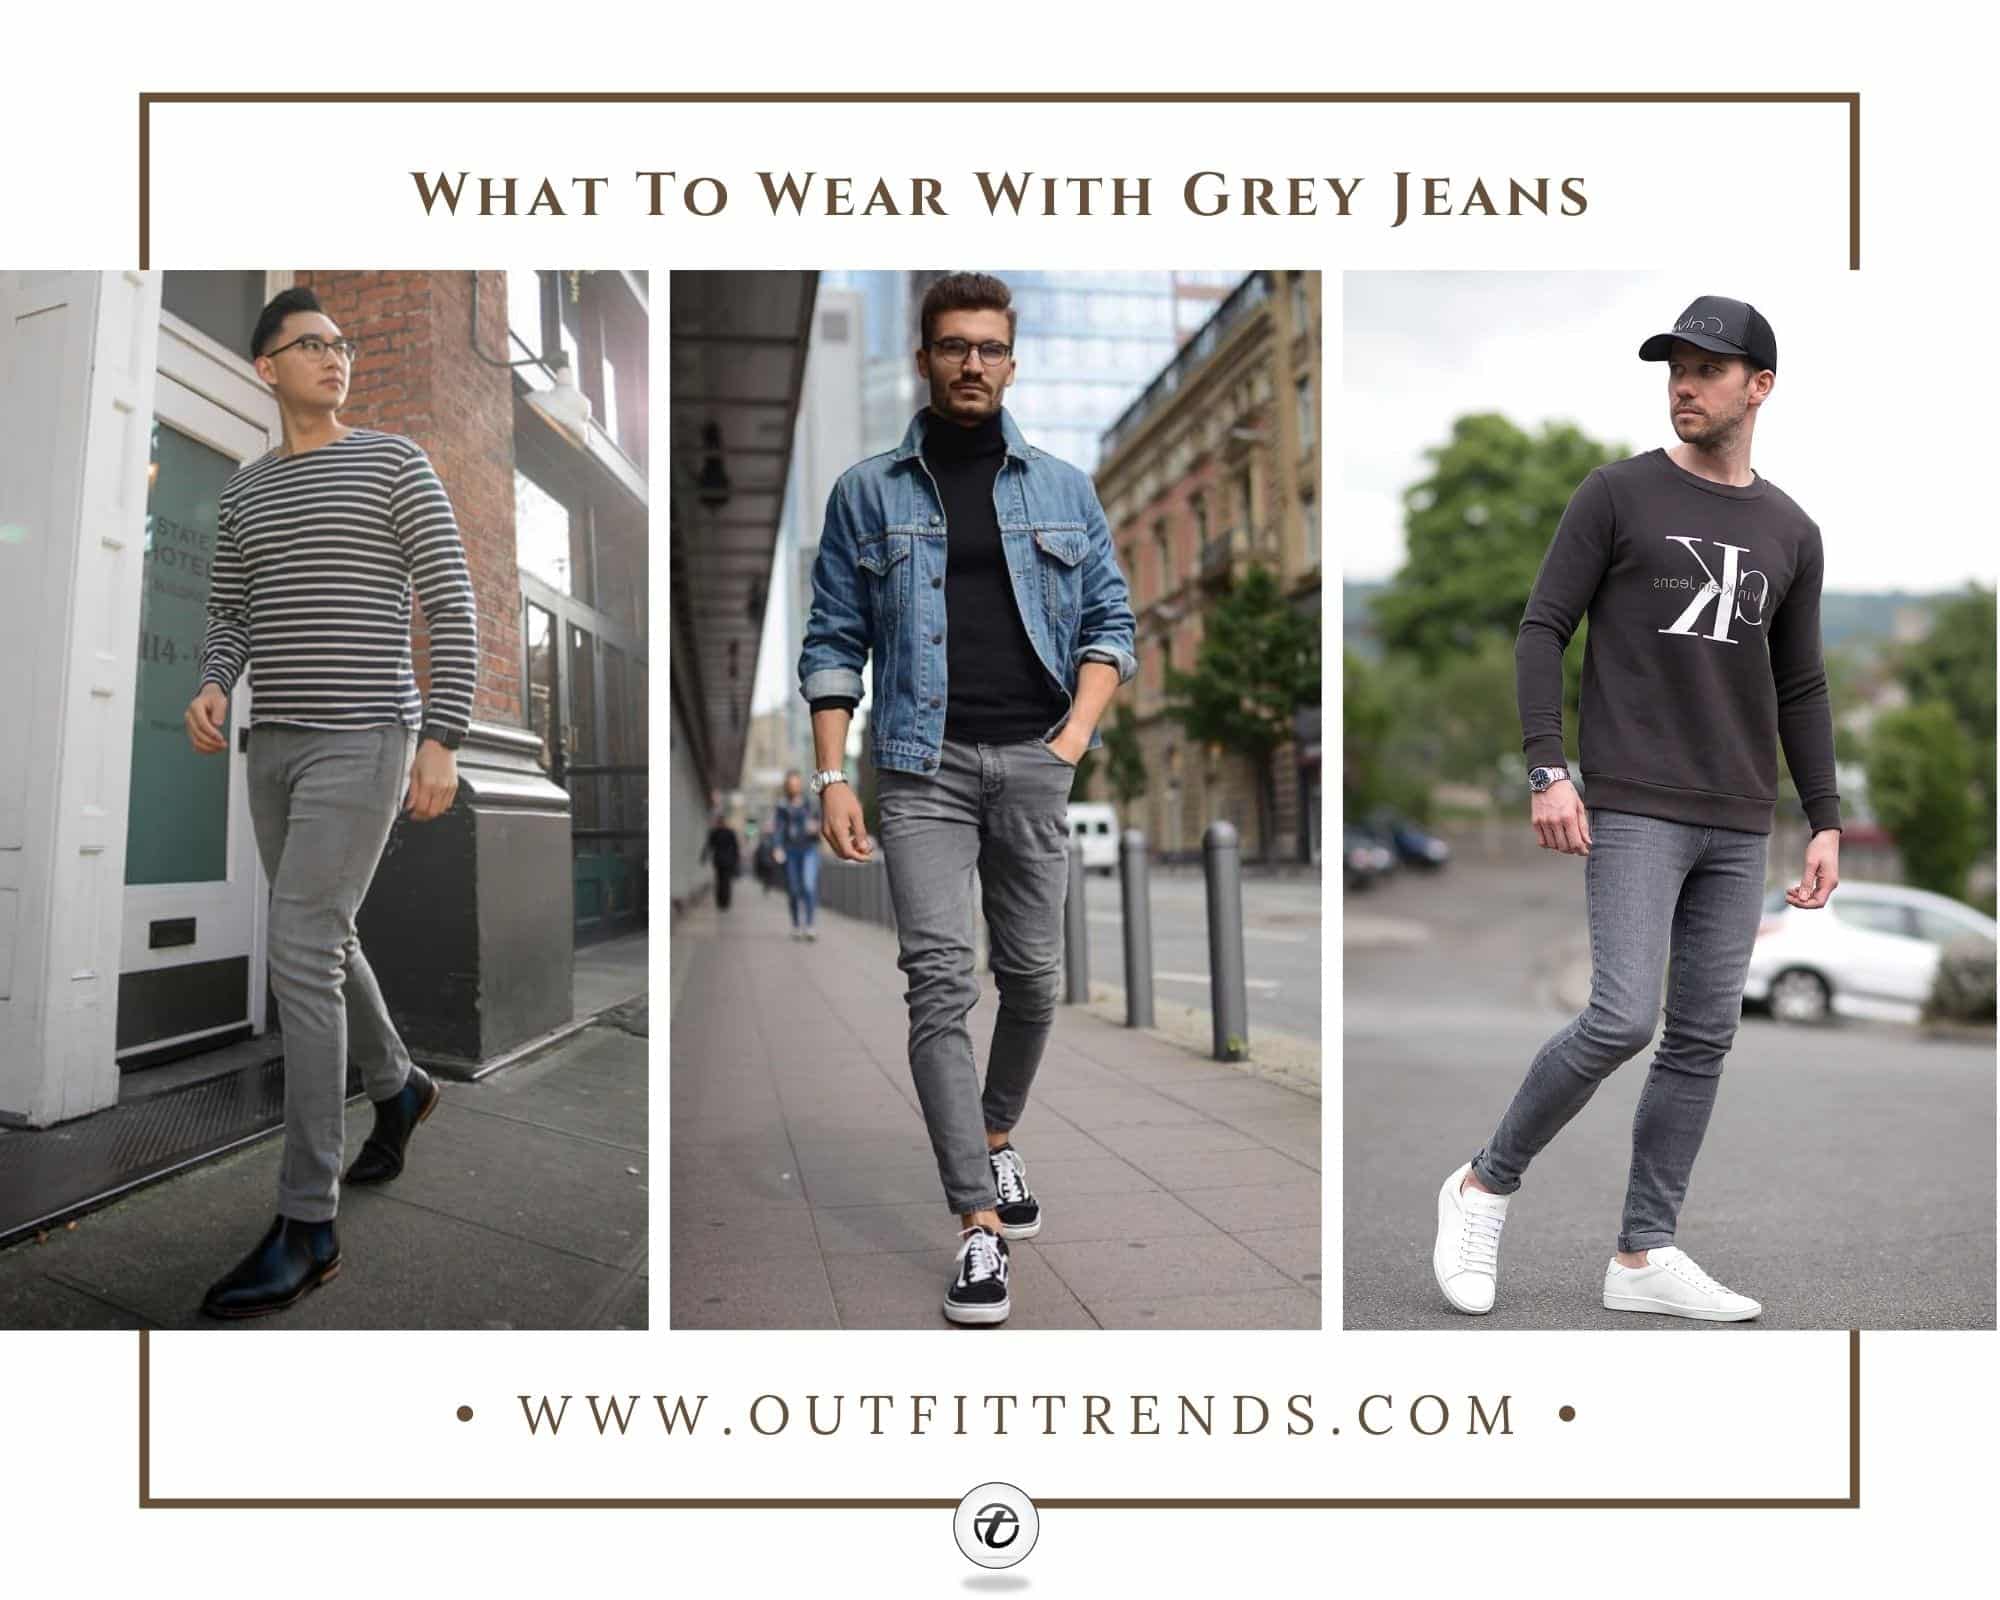 How to Style Grey Jeans for Men - Next Level Gents